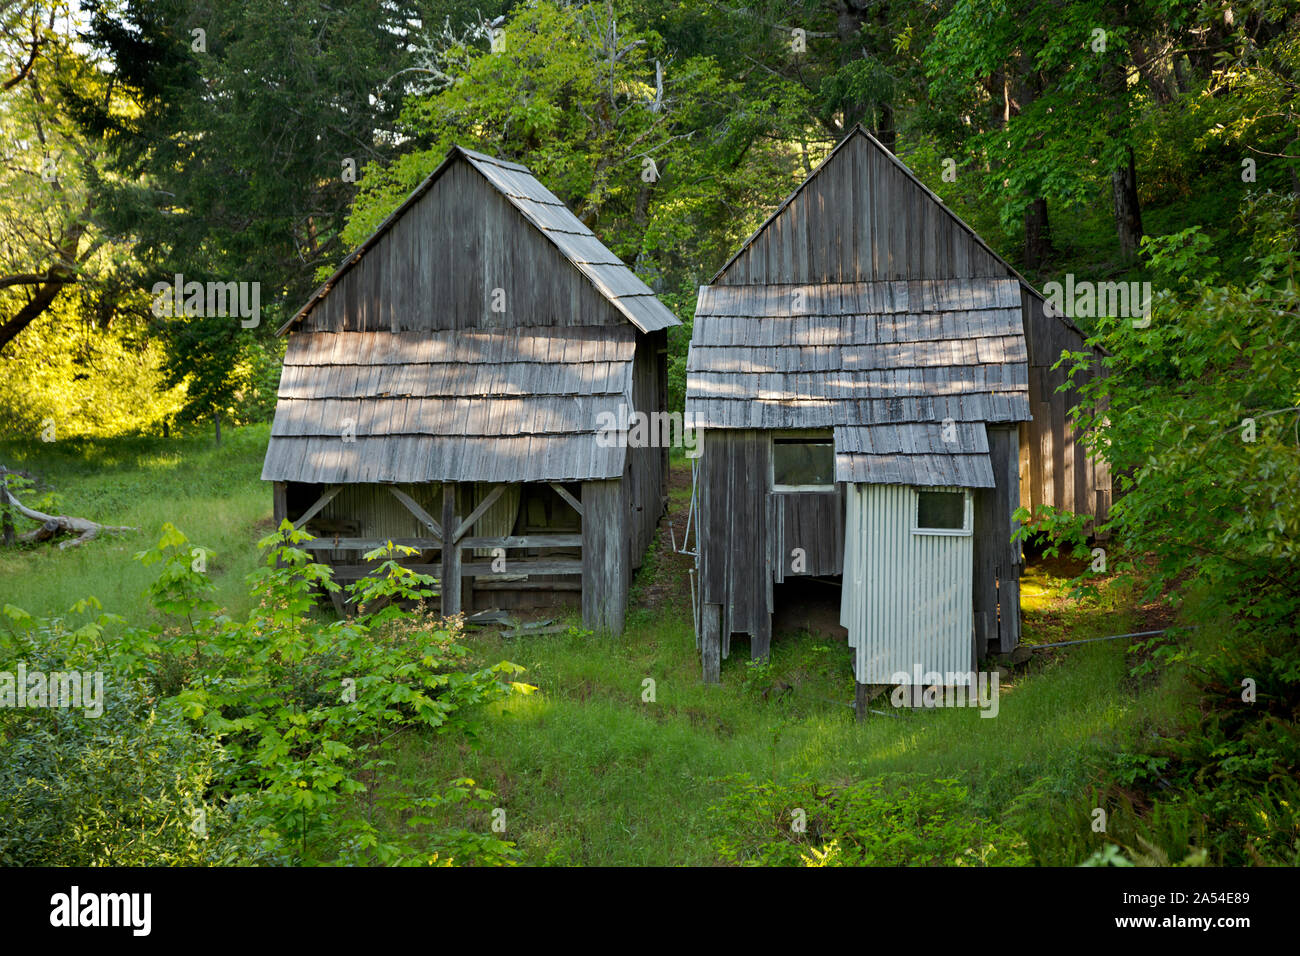 CA03727-00...CALIFORNIA - Old living quarters at historic Lyons Sheep Ranch located in the Bald Hills region of Redwoods National Park. Stock Photo